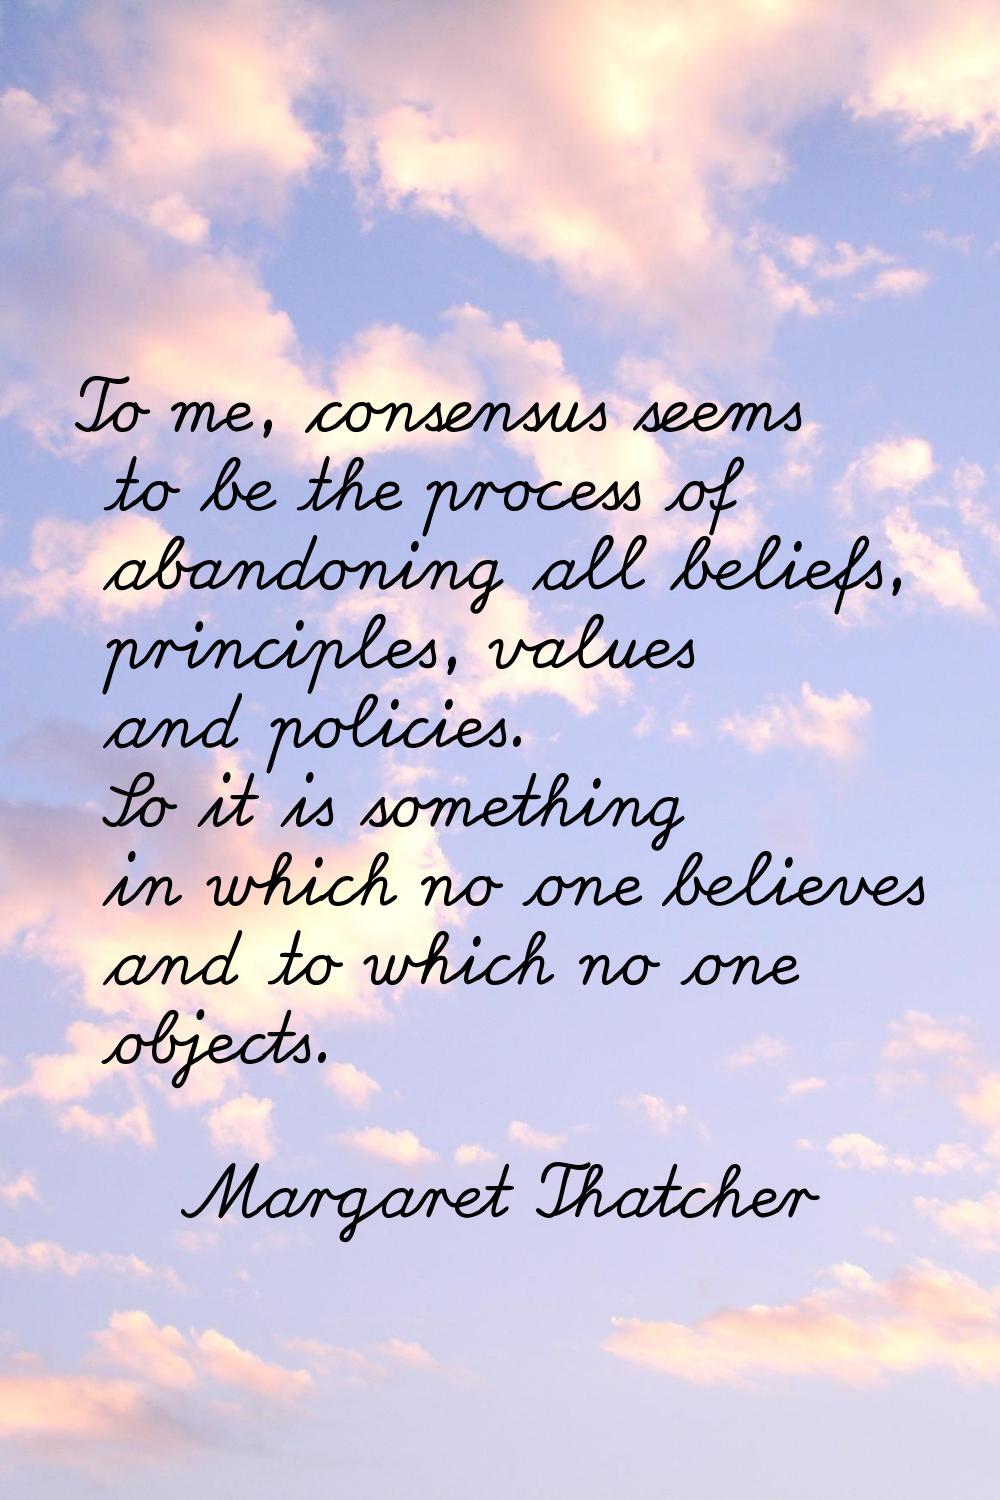 To me, consensus seems to be the process of abandoning all beliefs, principles, values and policies